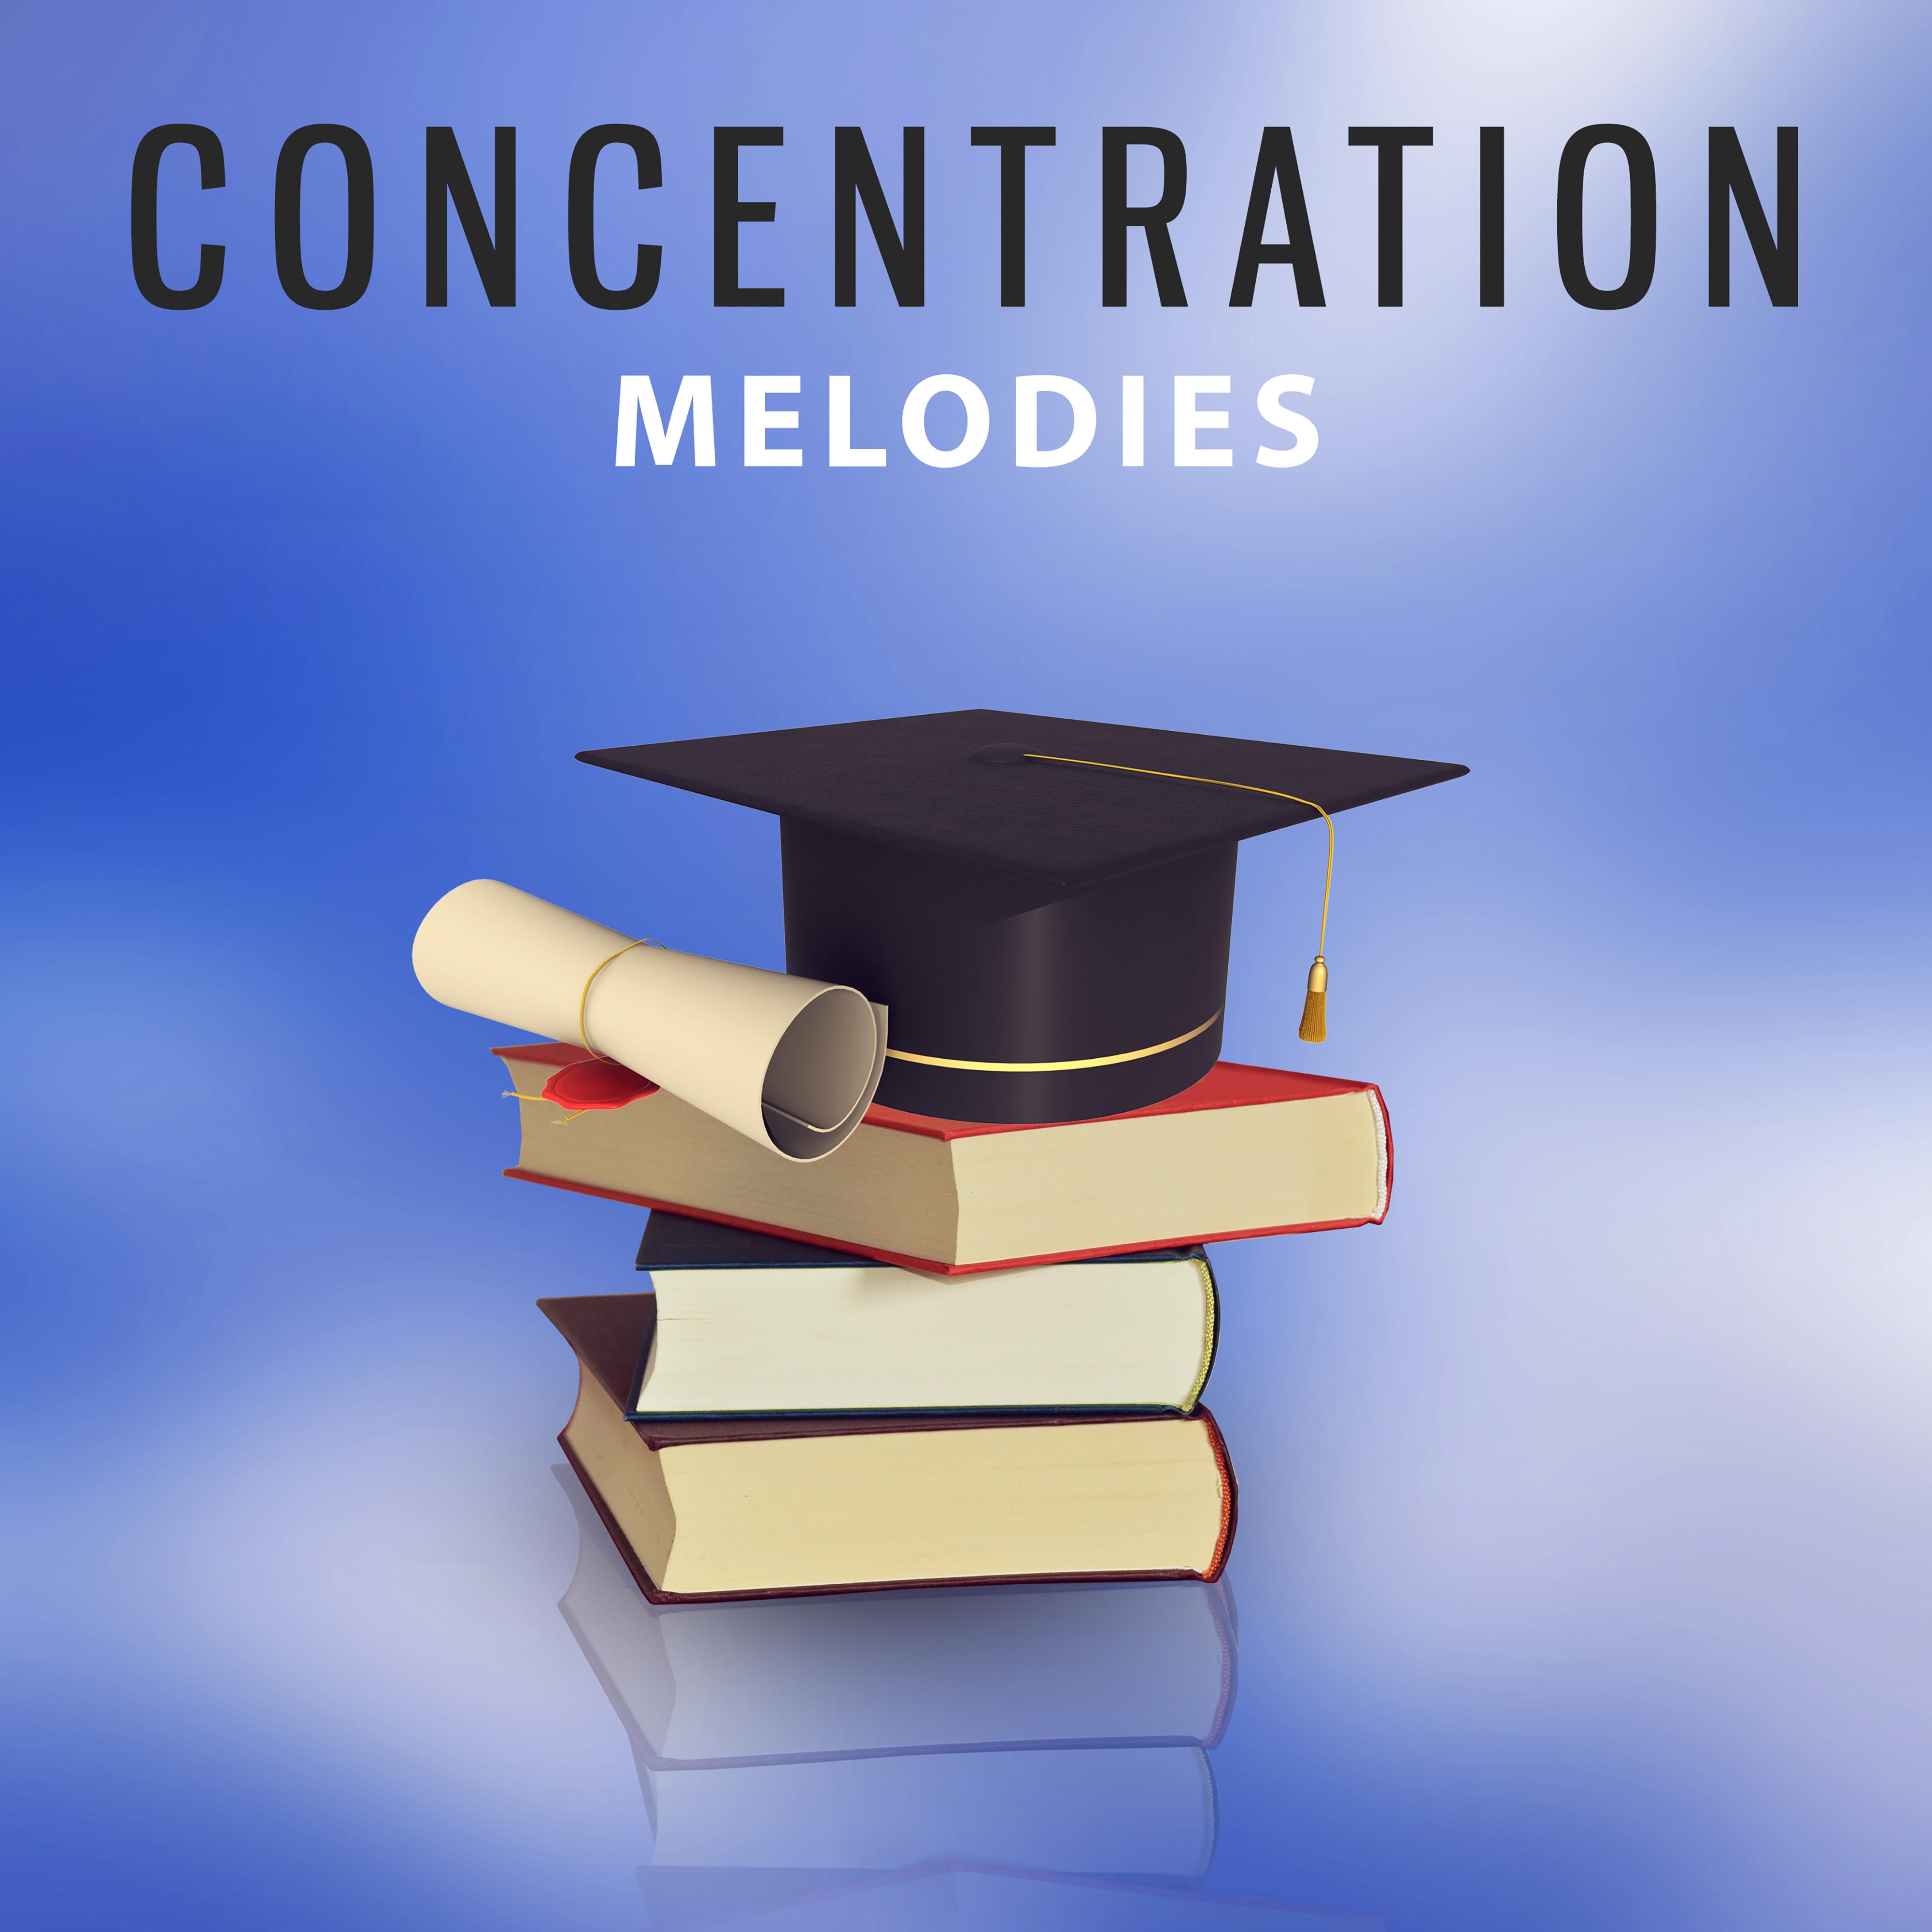 Concentration Melodies  New Age Music, Nature Sounds for Learning, Deep Focus, Train Your Mind